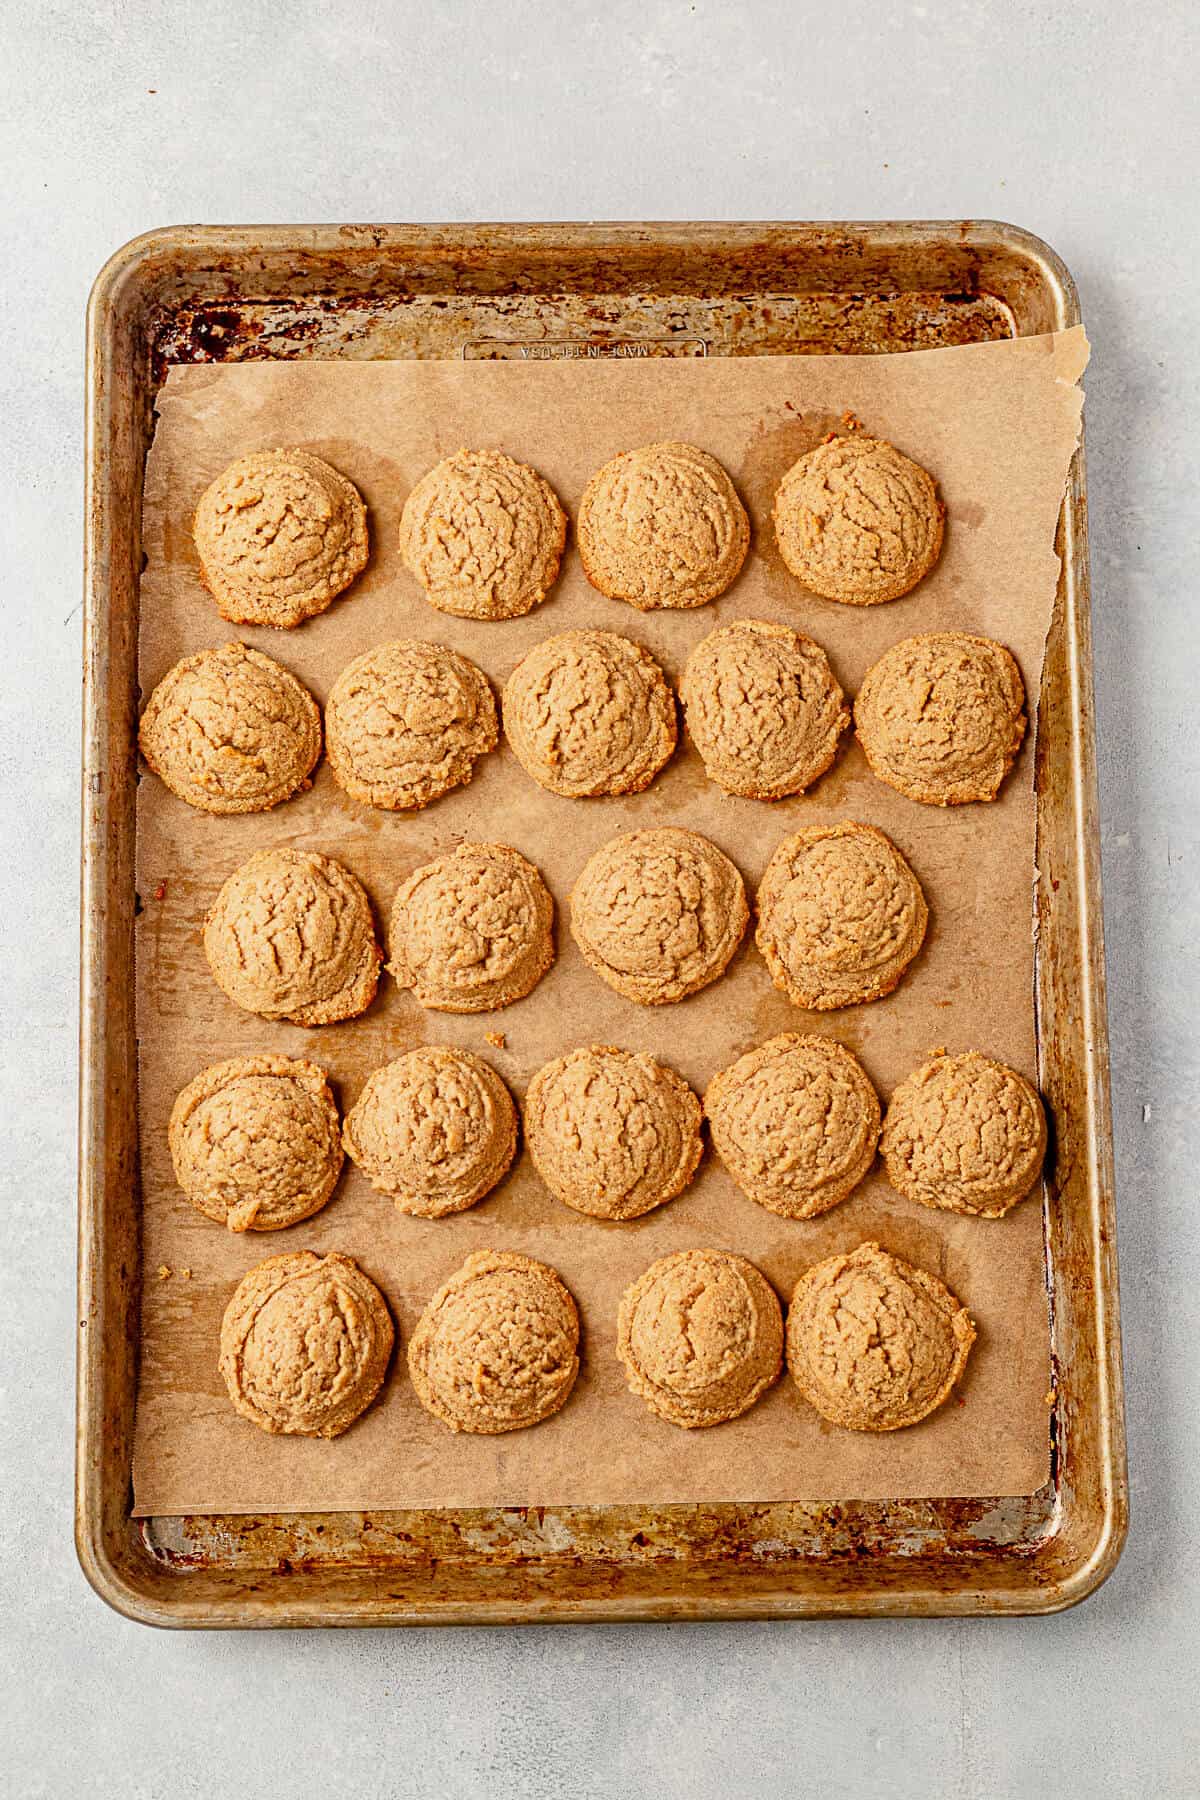 5 rows of almond flour peanut butter cookies on a cookie sheet